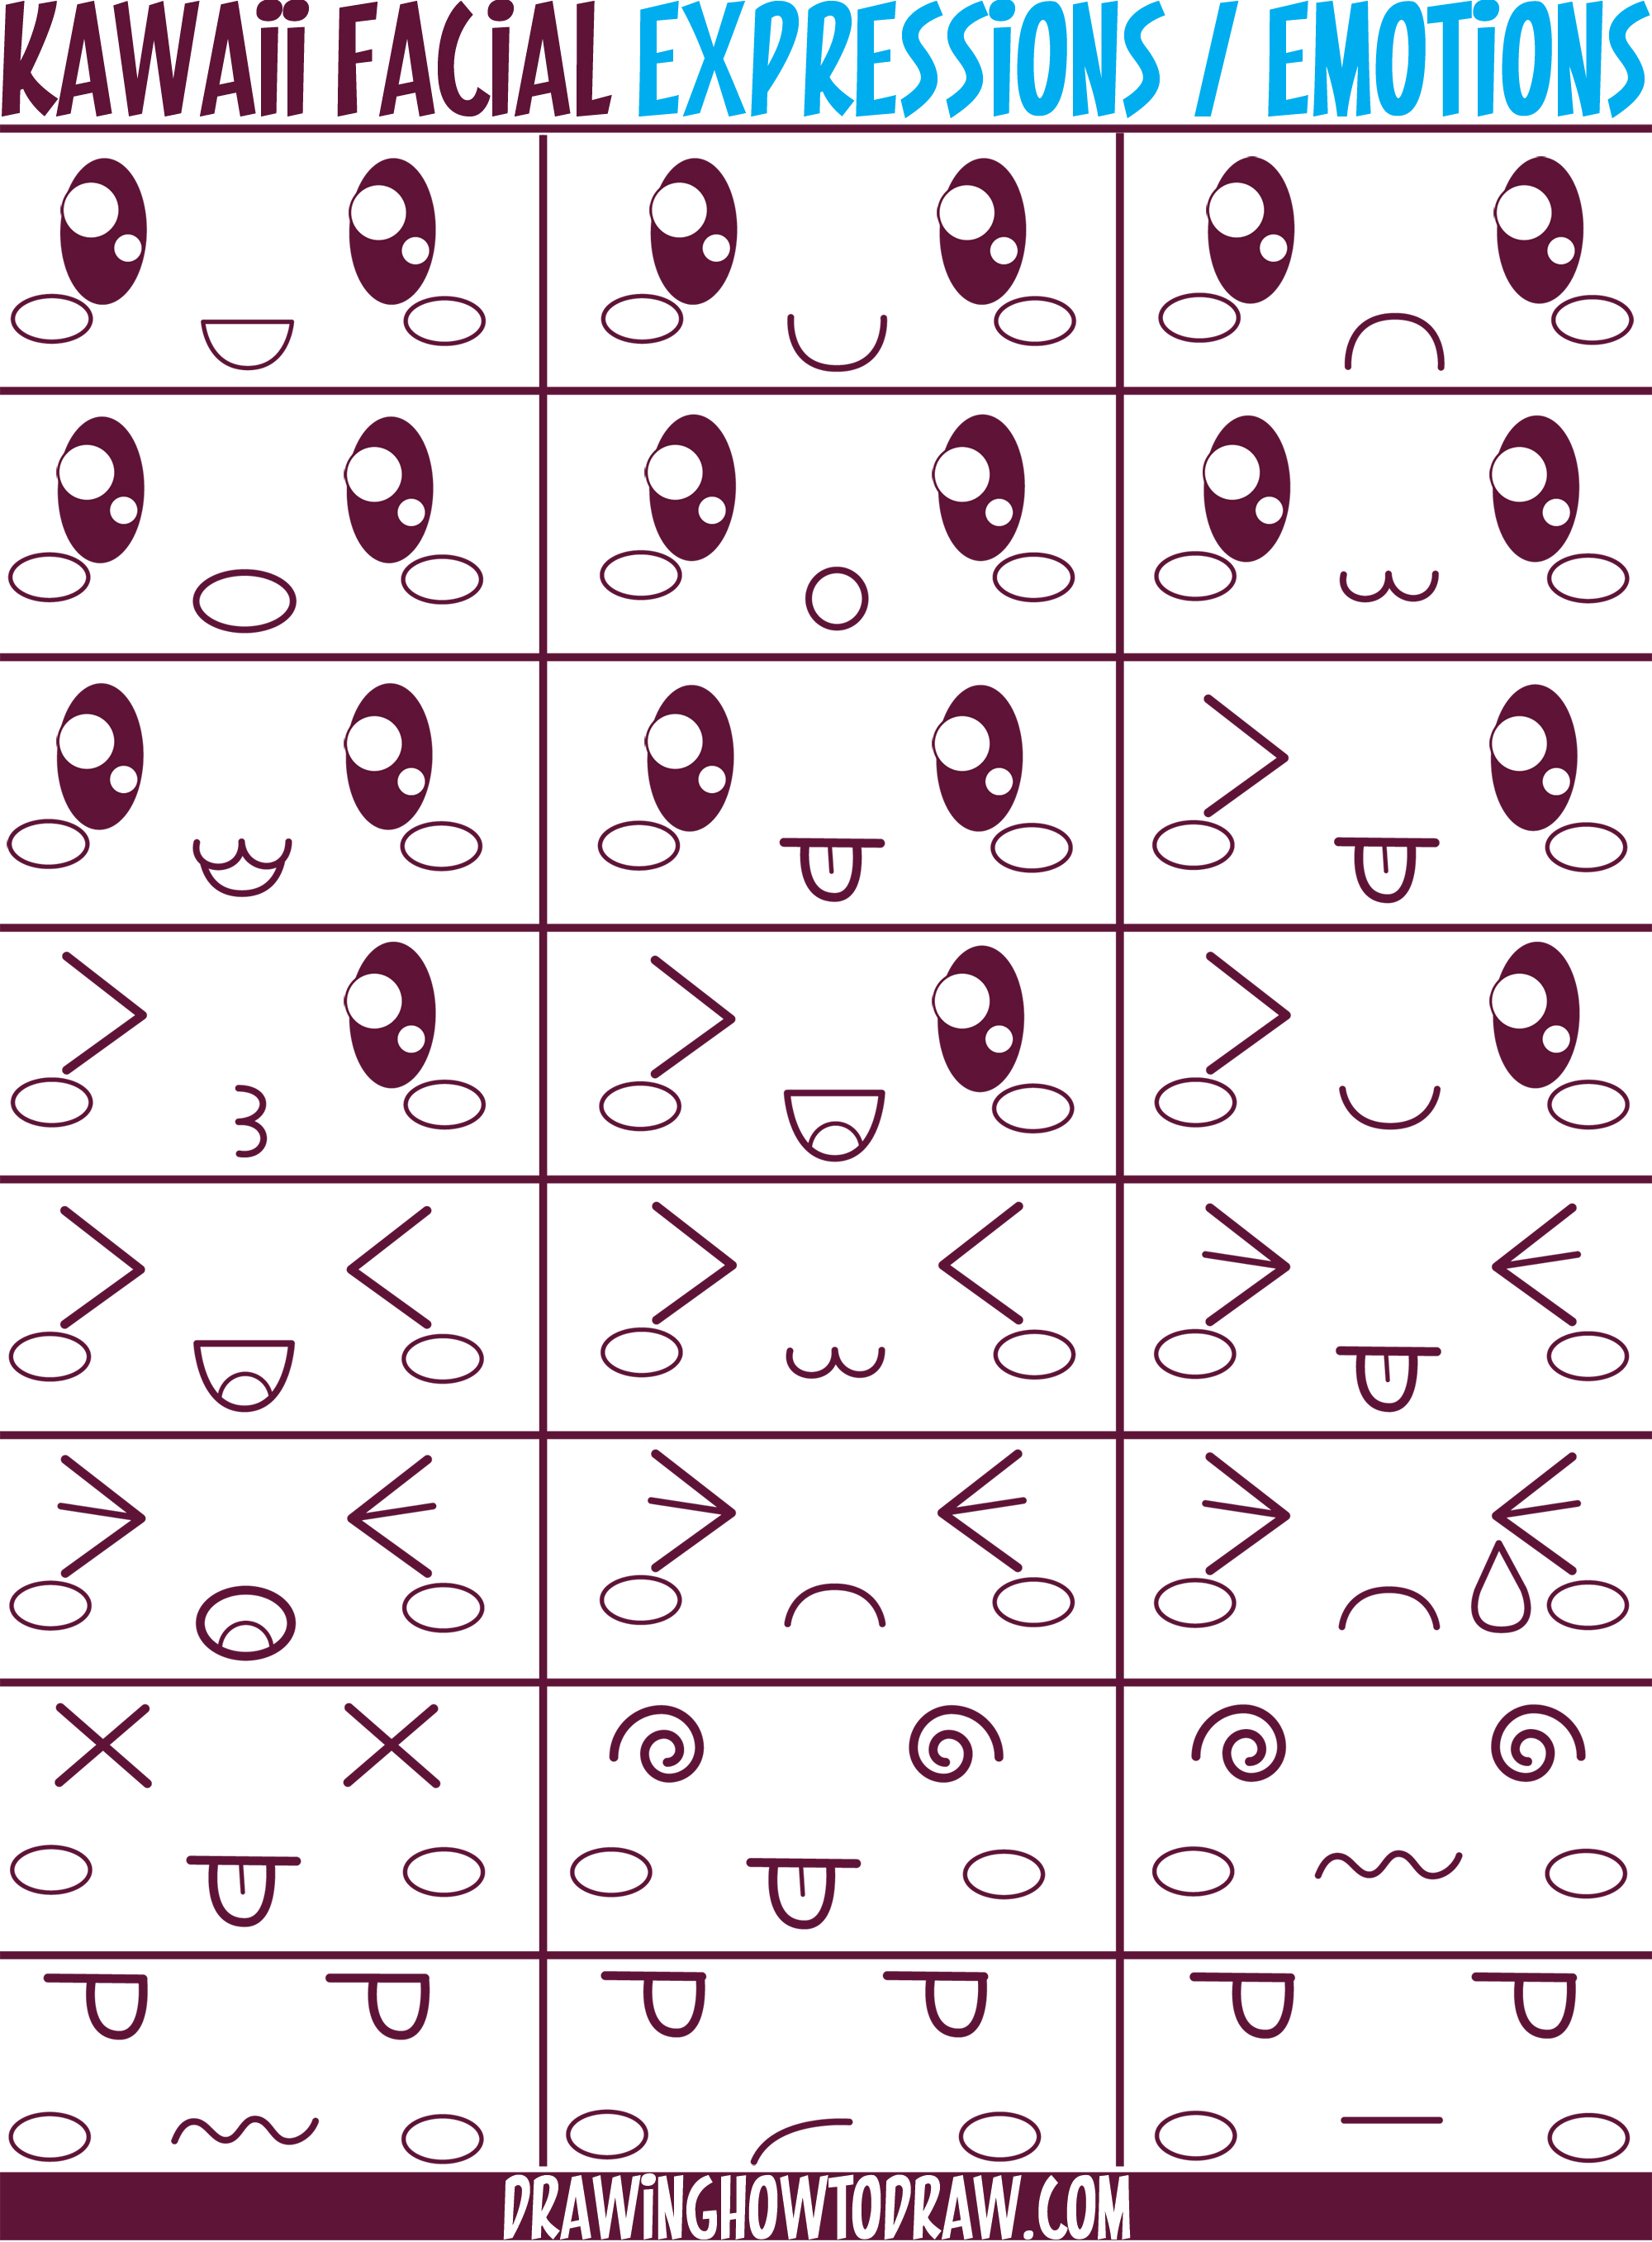 Guide to Drawing Kawaii Facial Emotions and Expressions